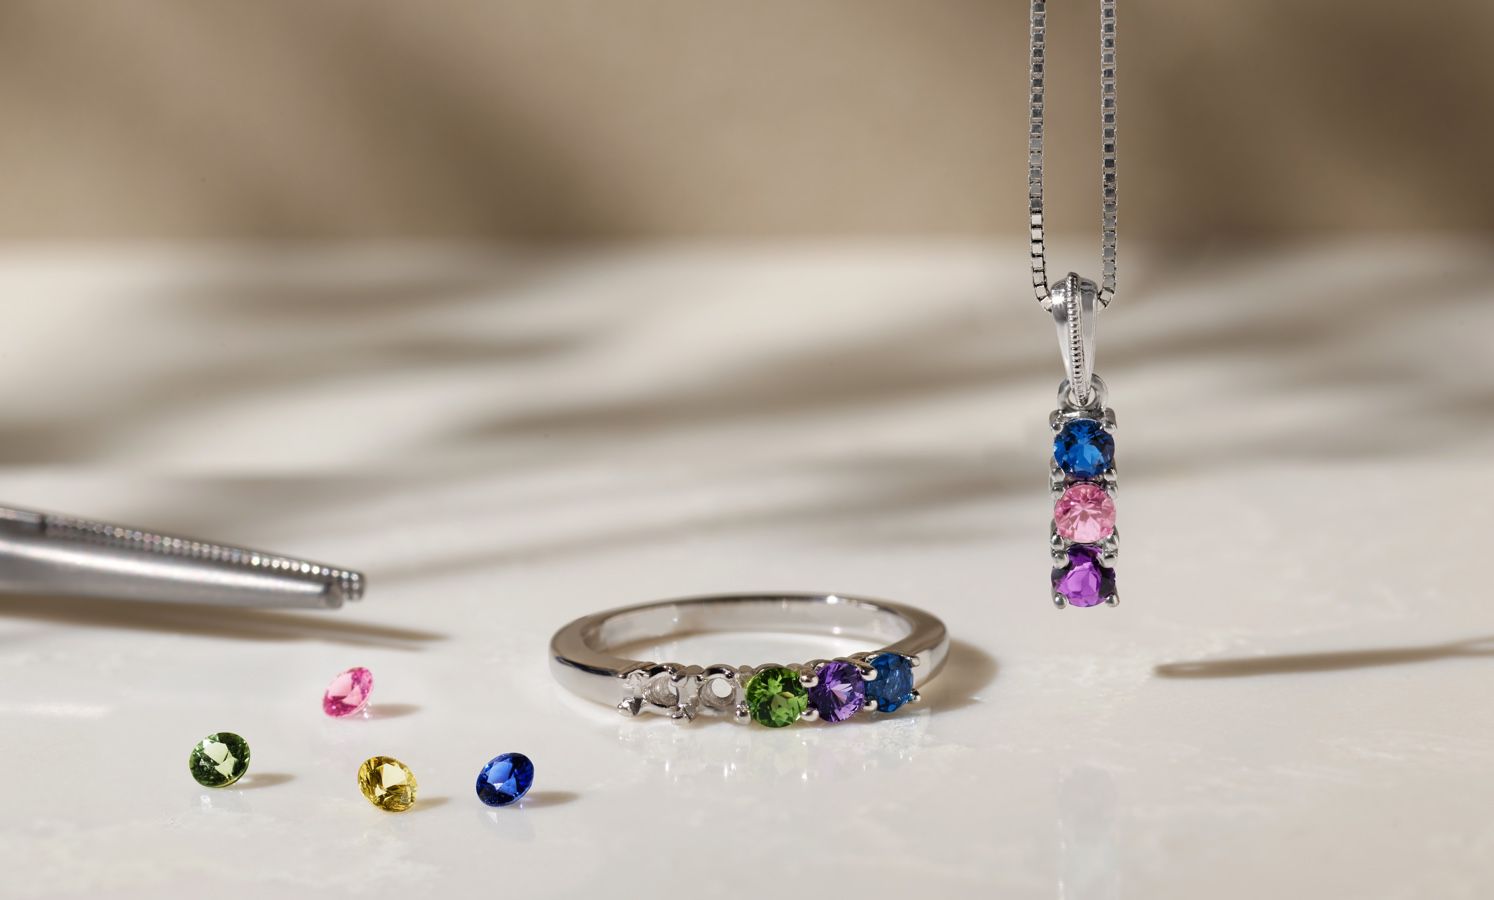 A collection of loose gemstones being set into a ring and pendant